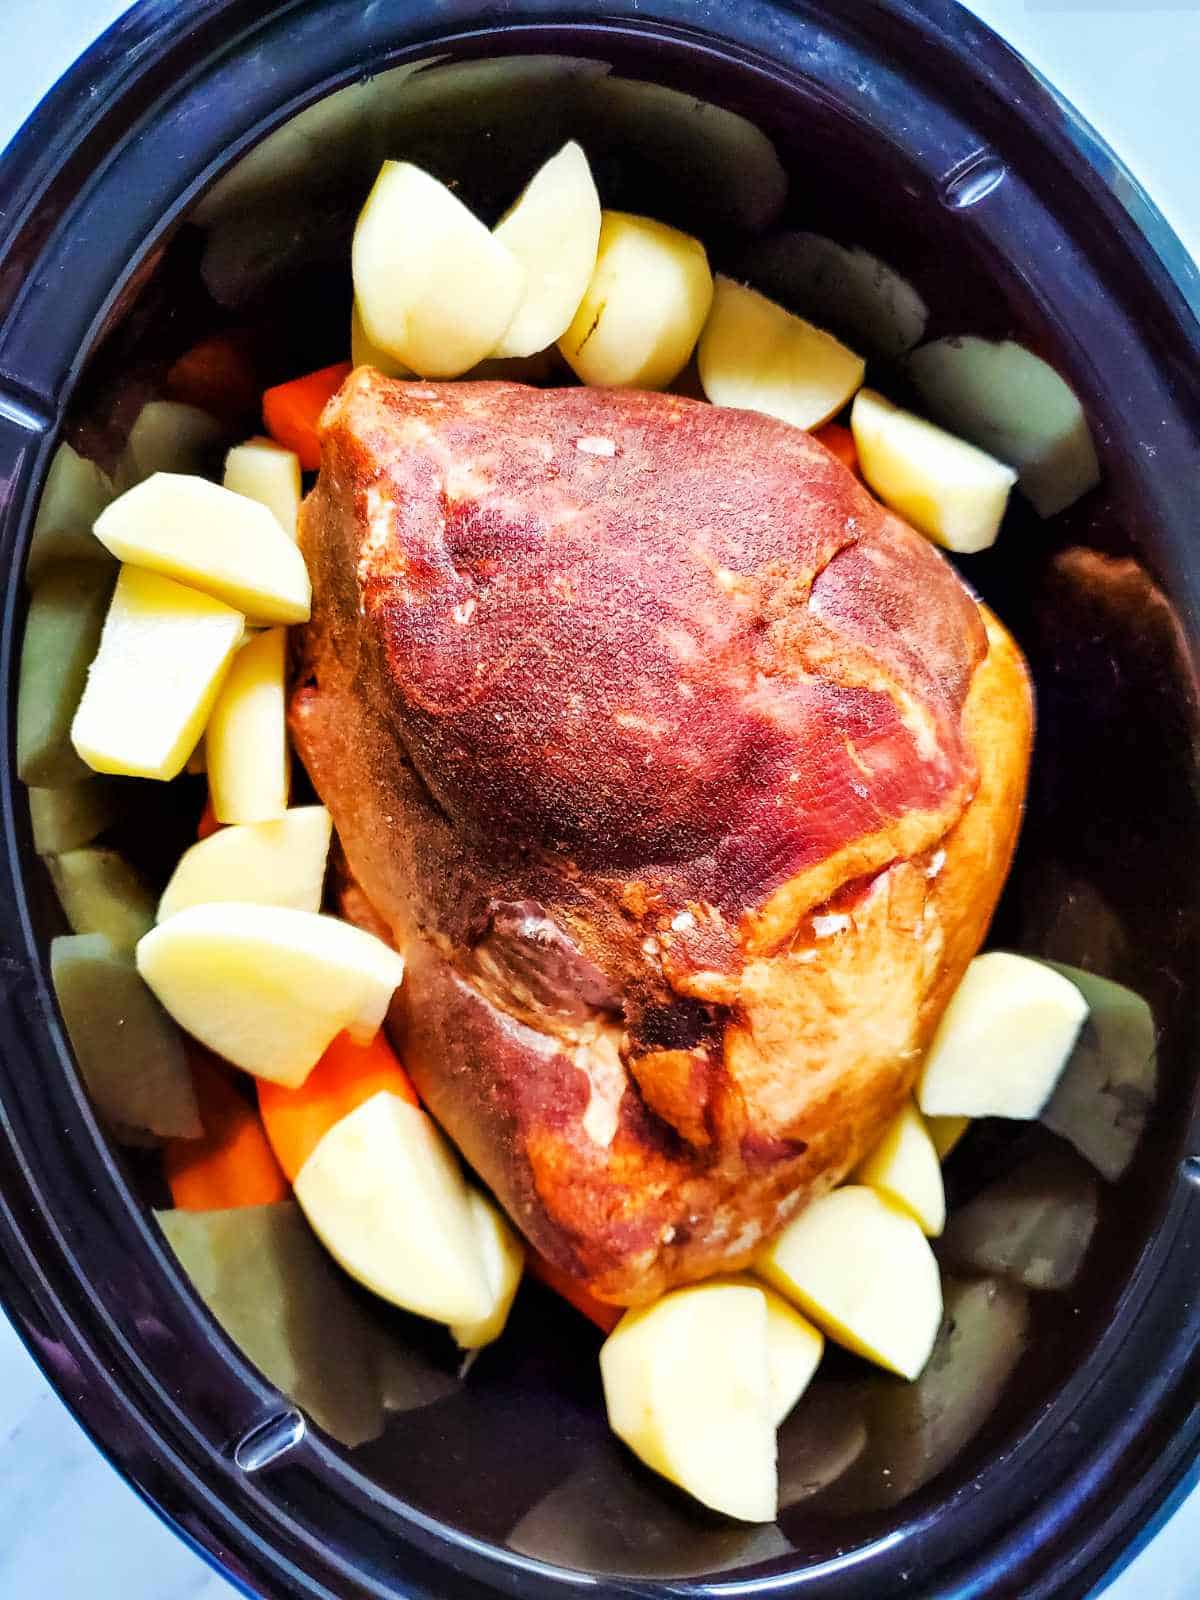 slow cooker with gammon and vegetables.